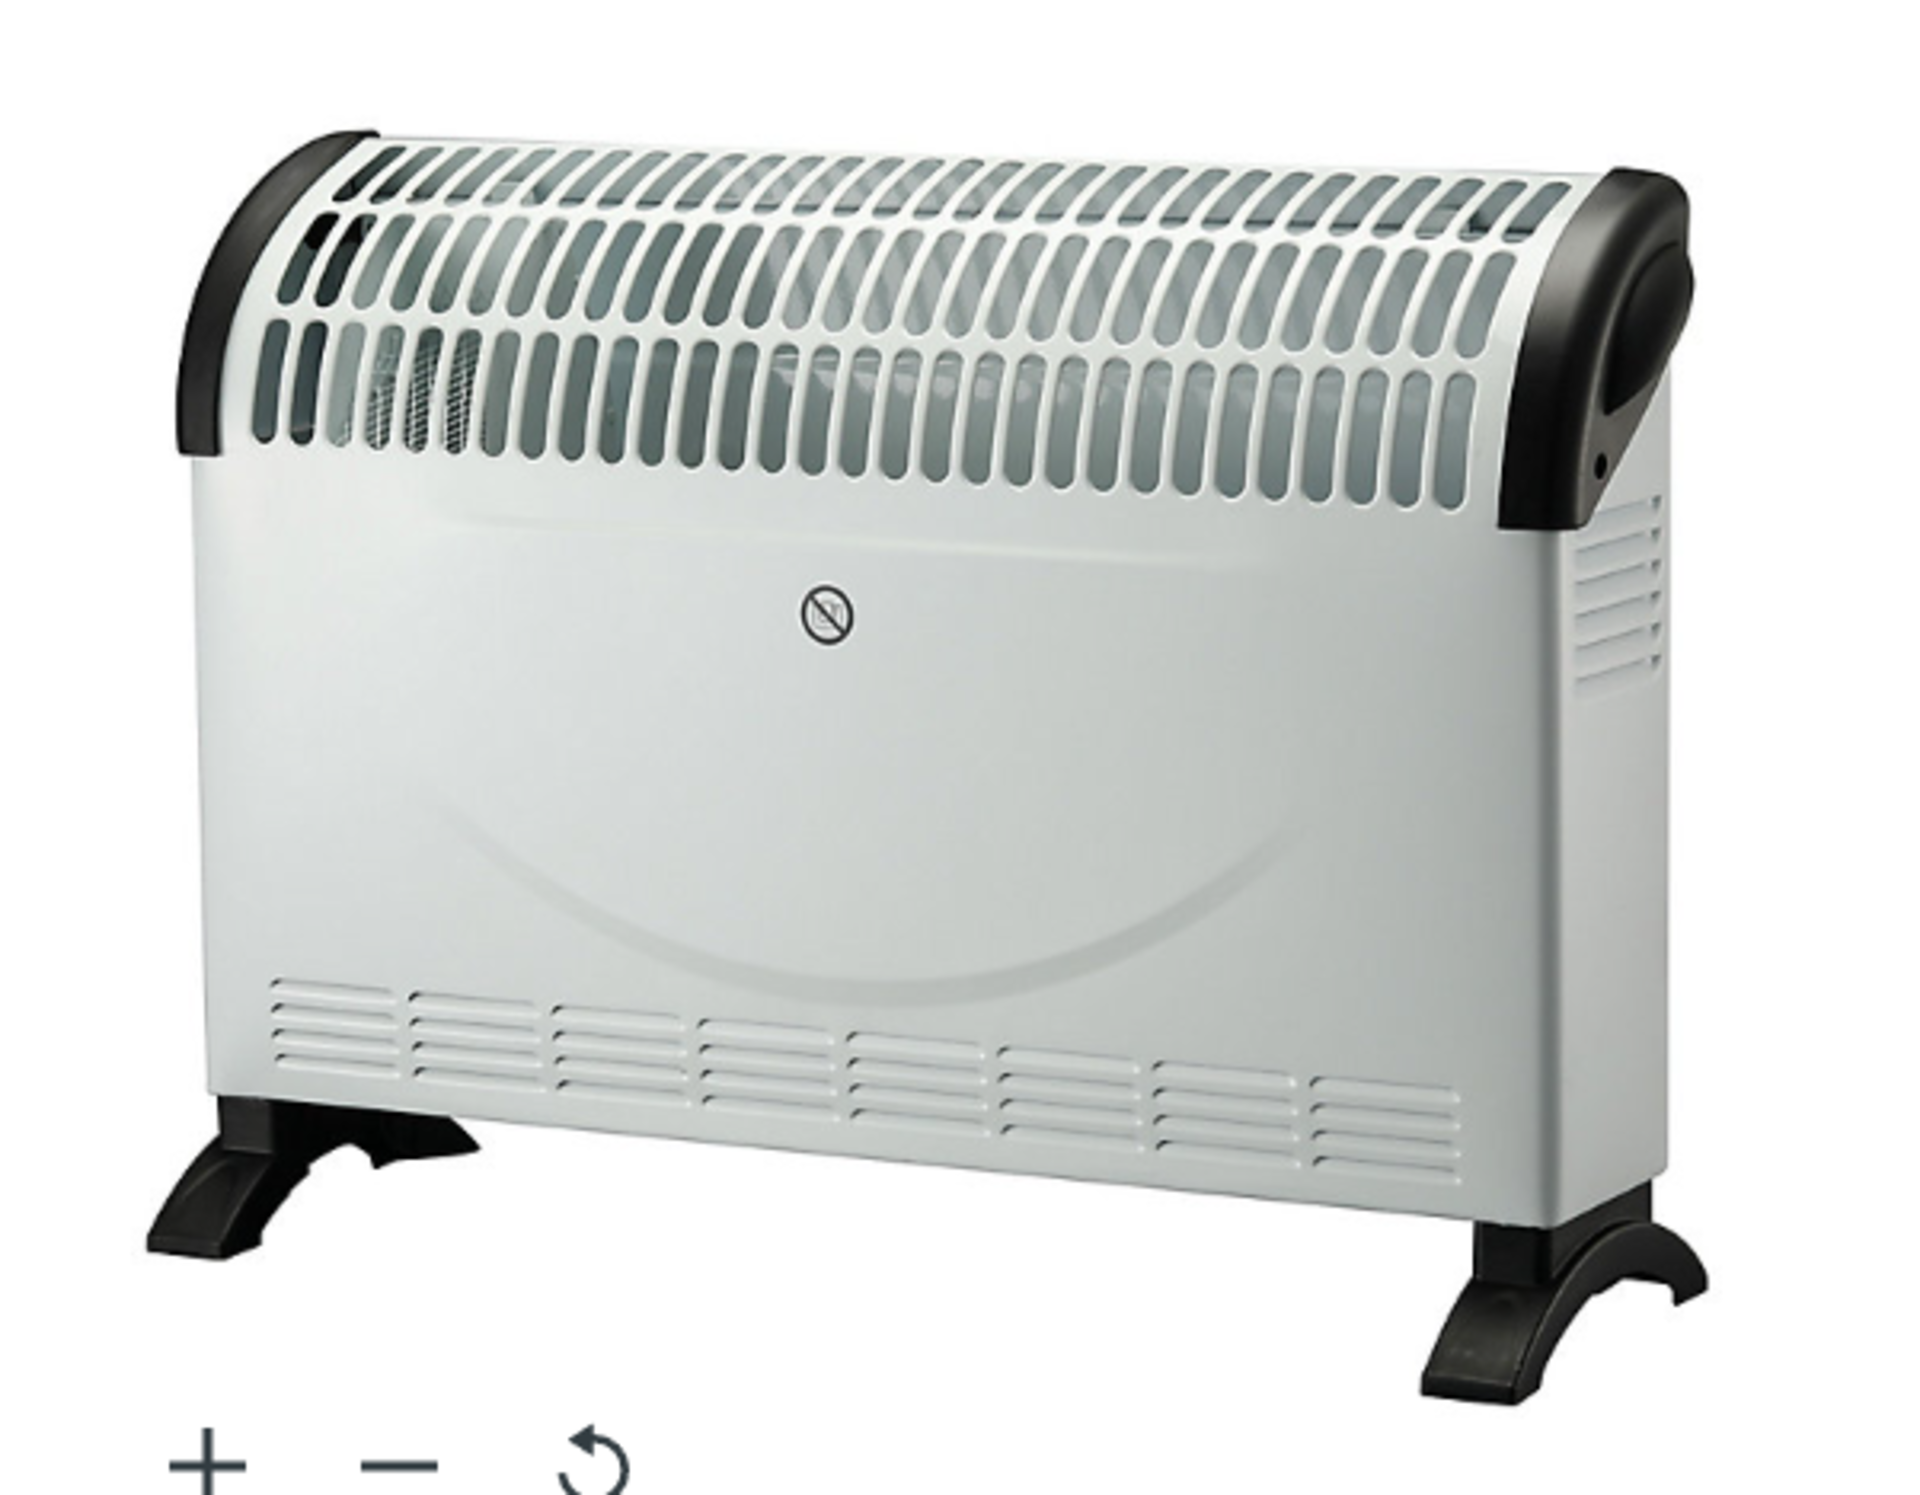 8 x 2000W White Convector heater. - ER33. Keep warm and cosy with this 2000W freestanding